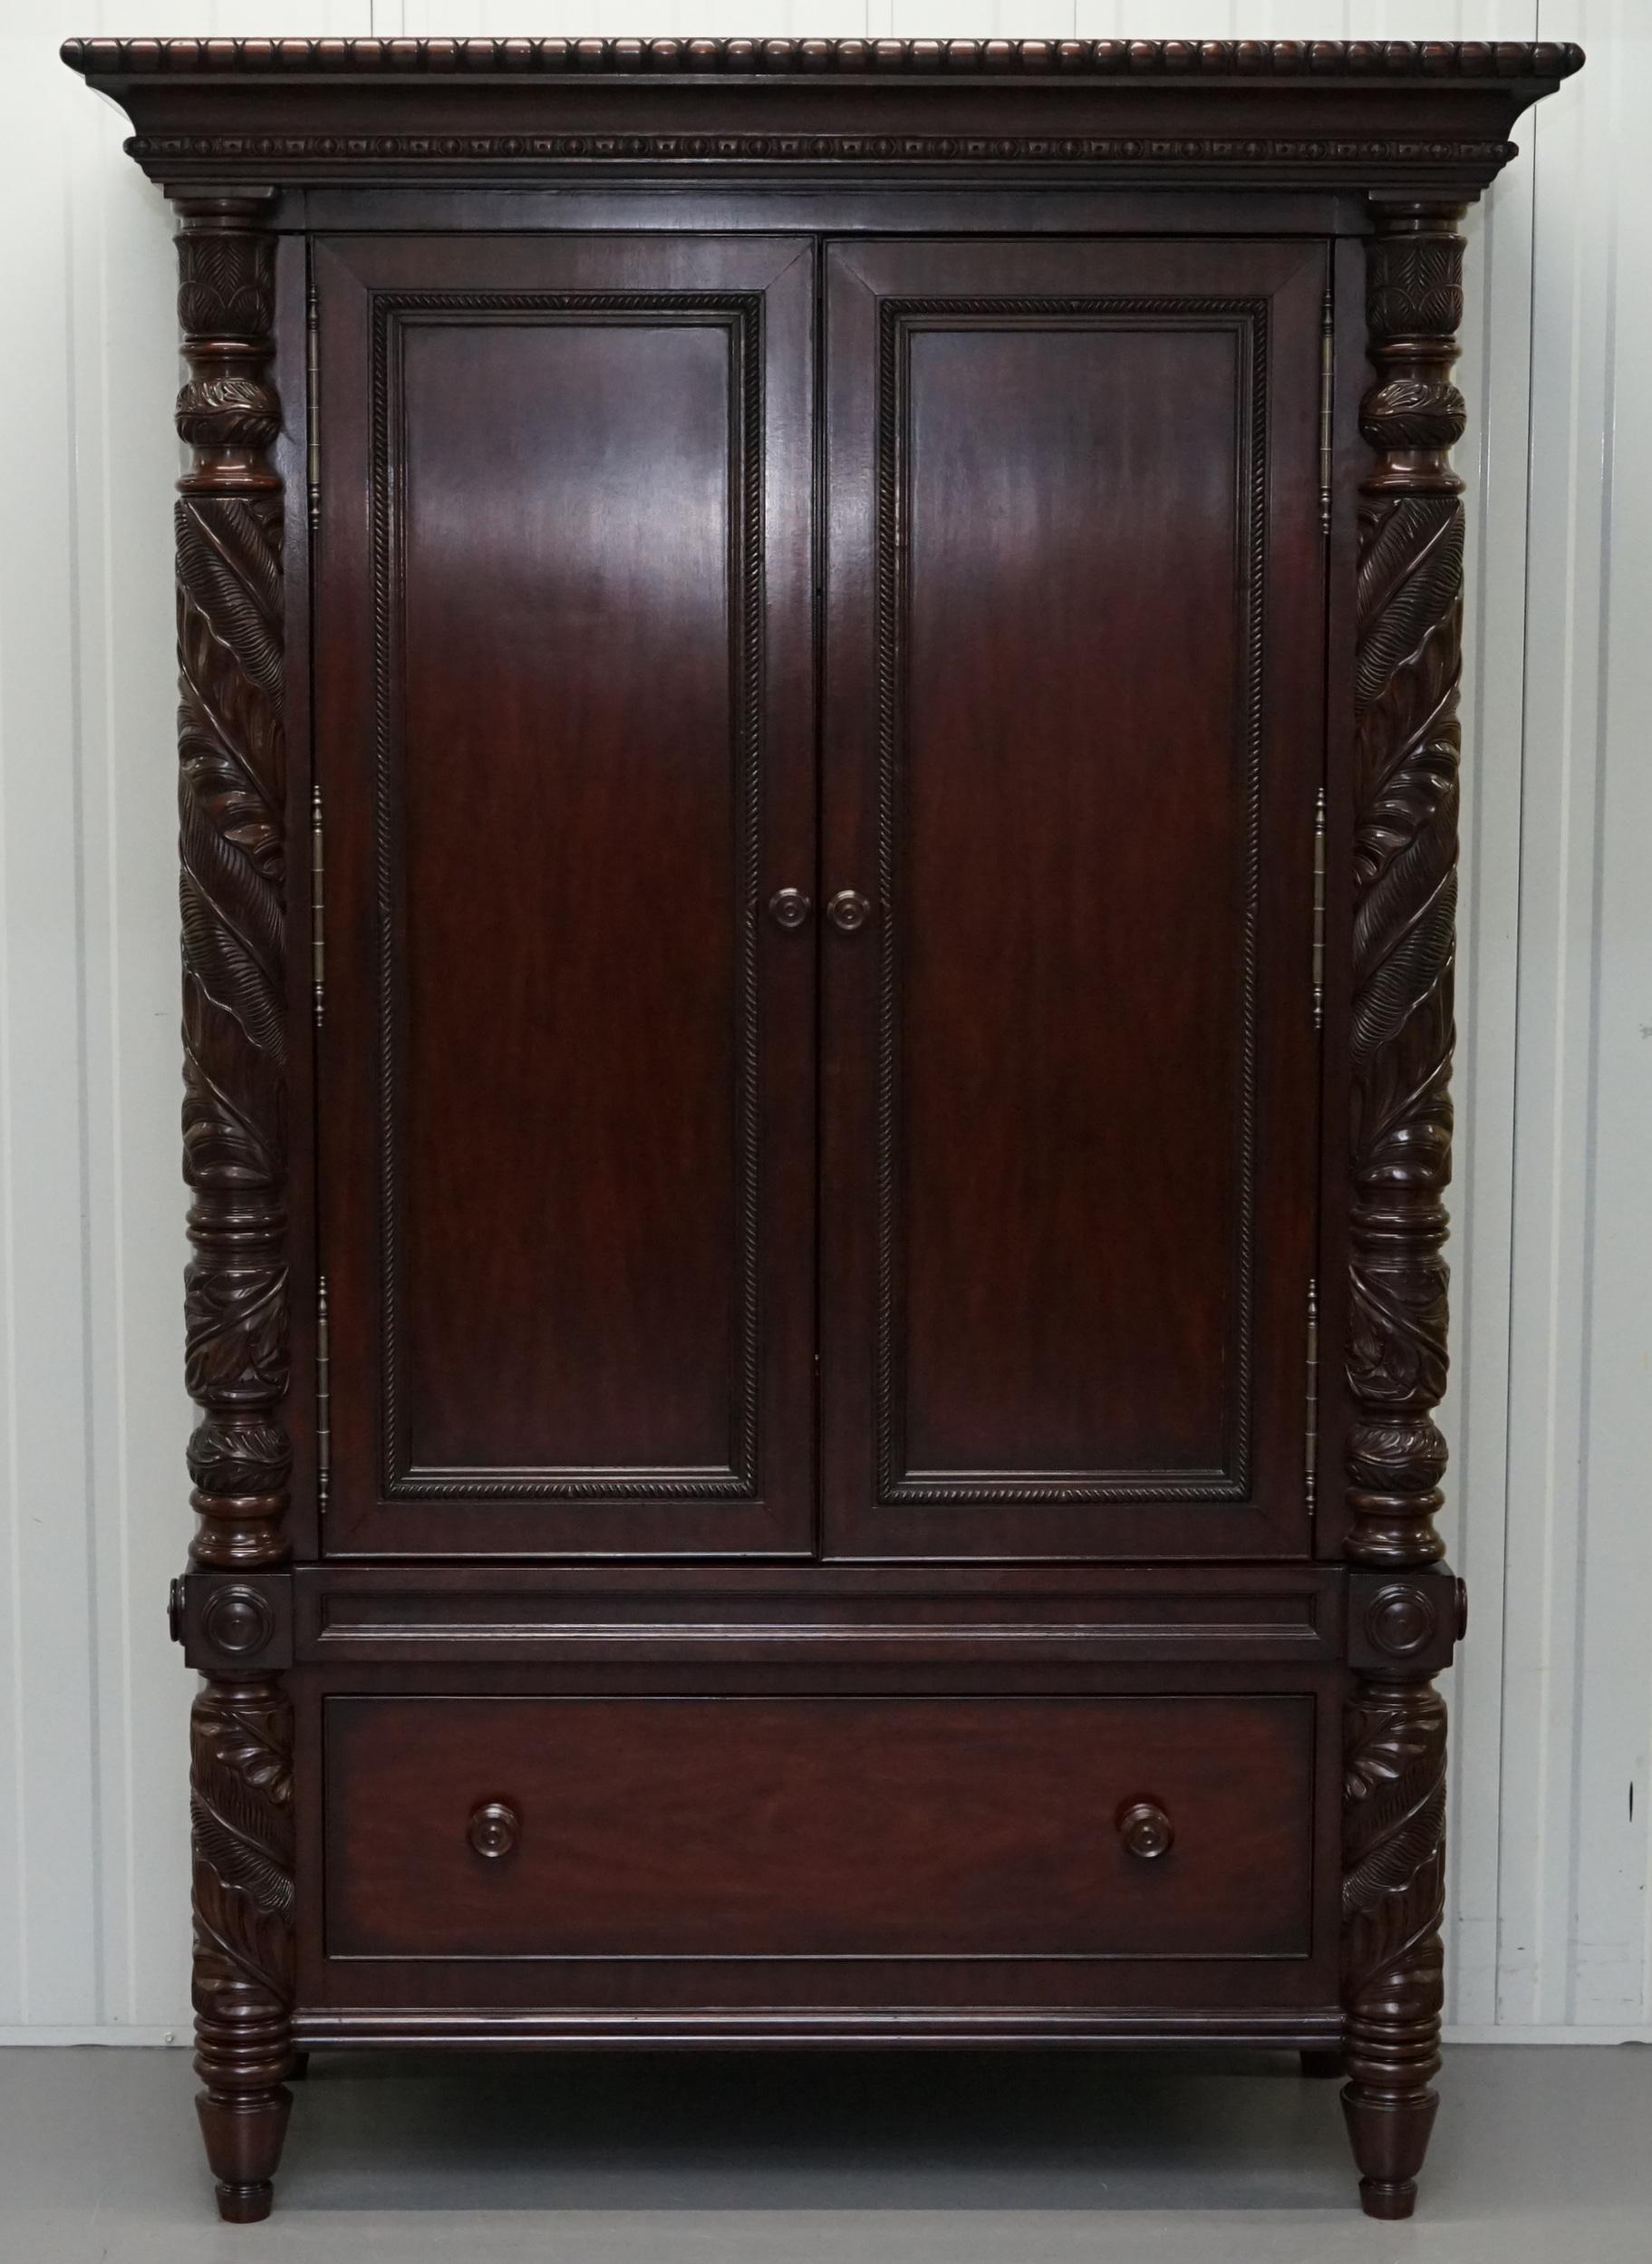 We are delighted to offer for sale this lovely very large and exceptionally heavy Ralph Lauren solid American Mahogany media cabinet.

A good looking and well made piece, it is as solid as they come, made and designed as a media cabinet so to hold